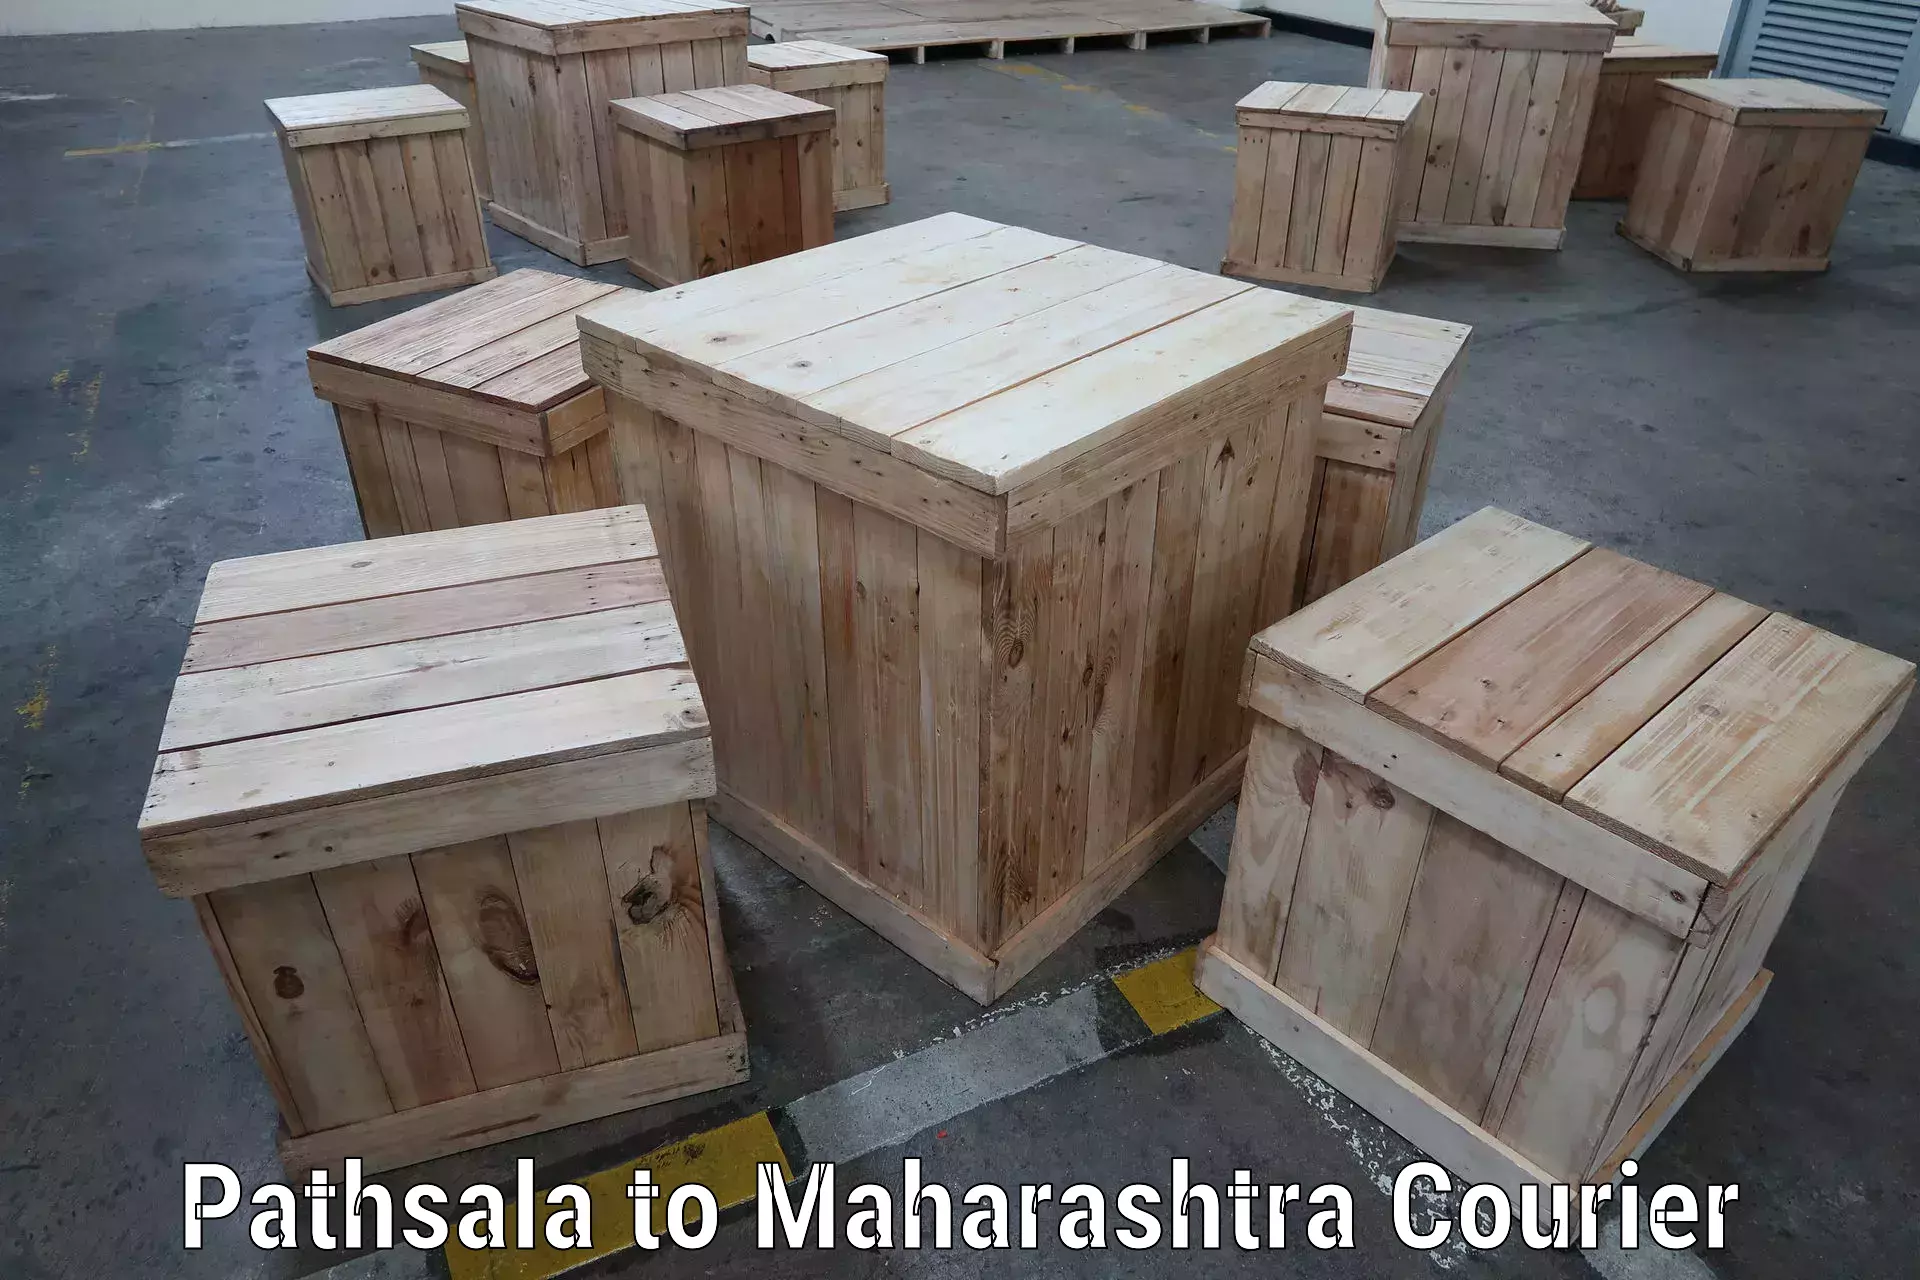 Package delivery network Pathsala to Maharashtra